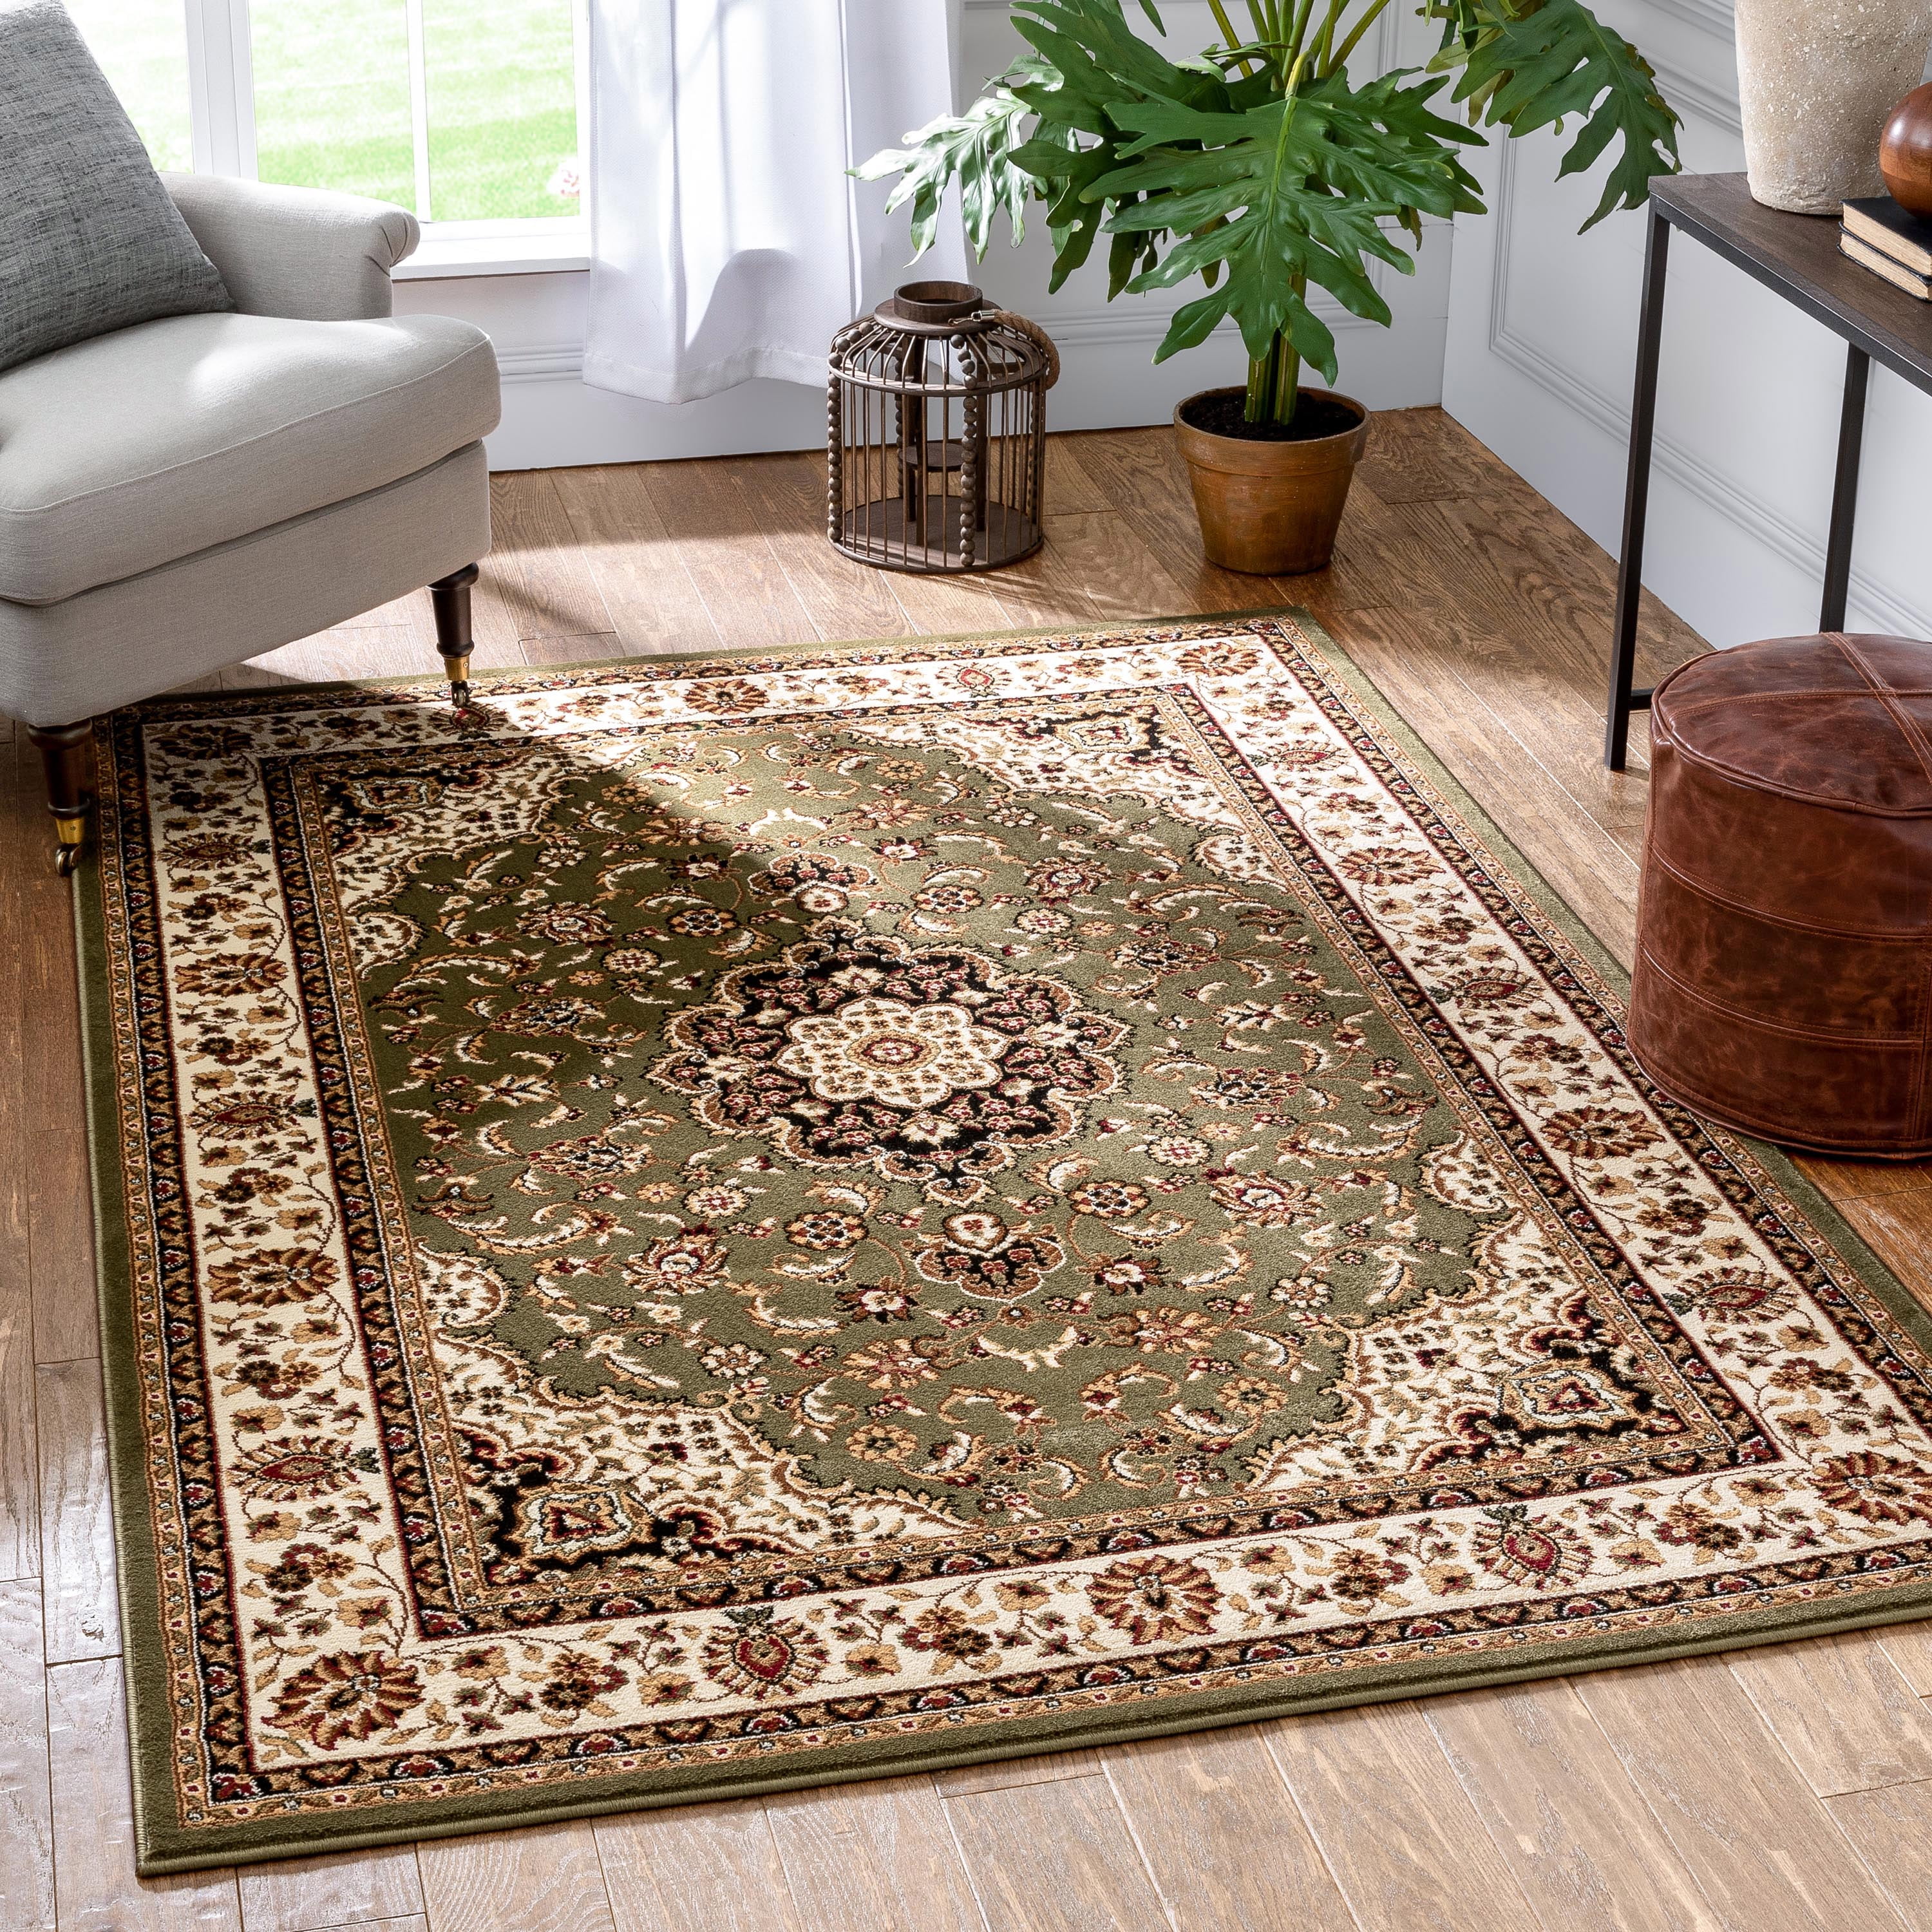 Traditional Oriental Medallion Area Rug Persian Style Carpet All Sizes 